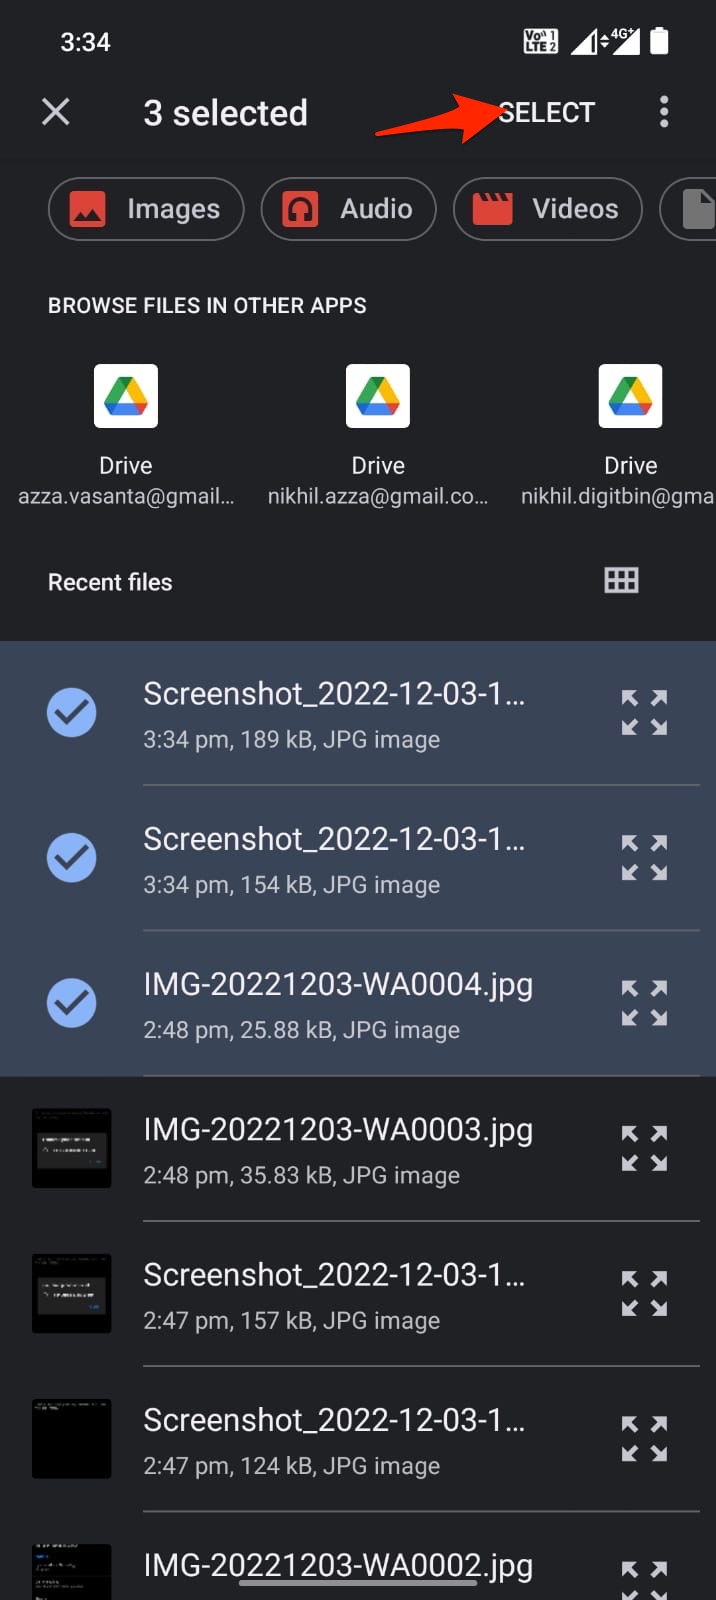 Select Files and Upload